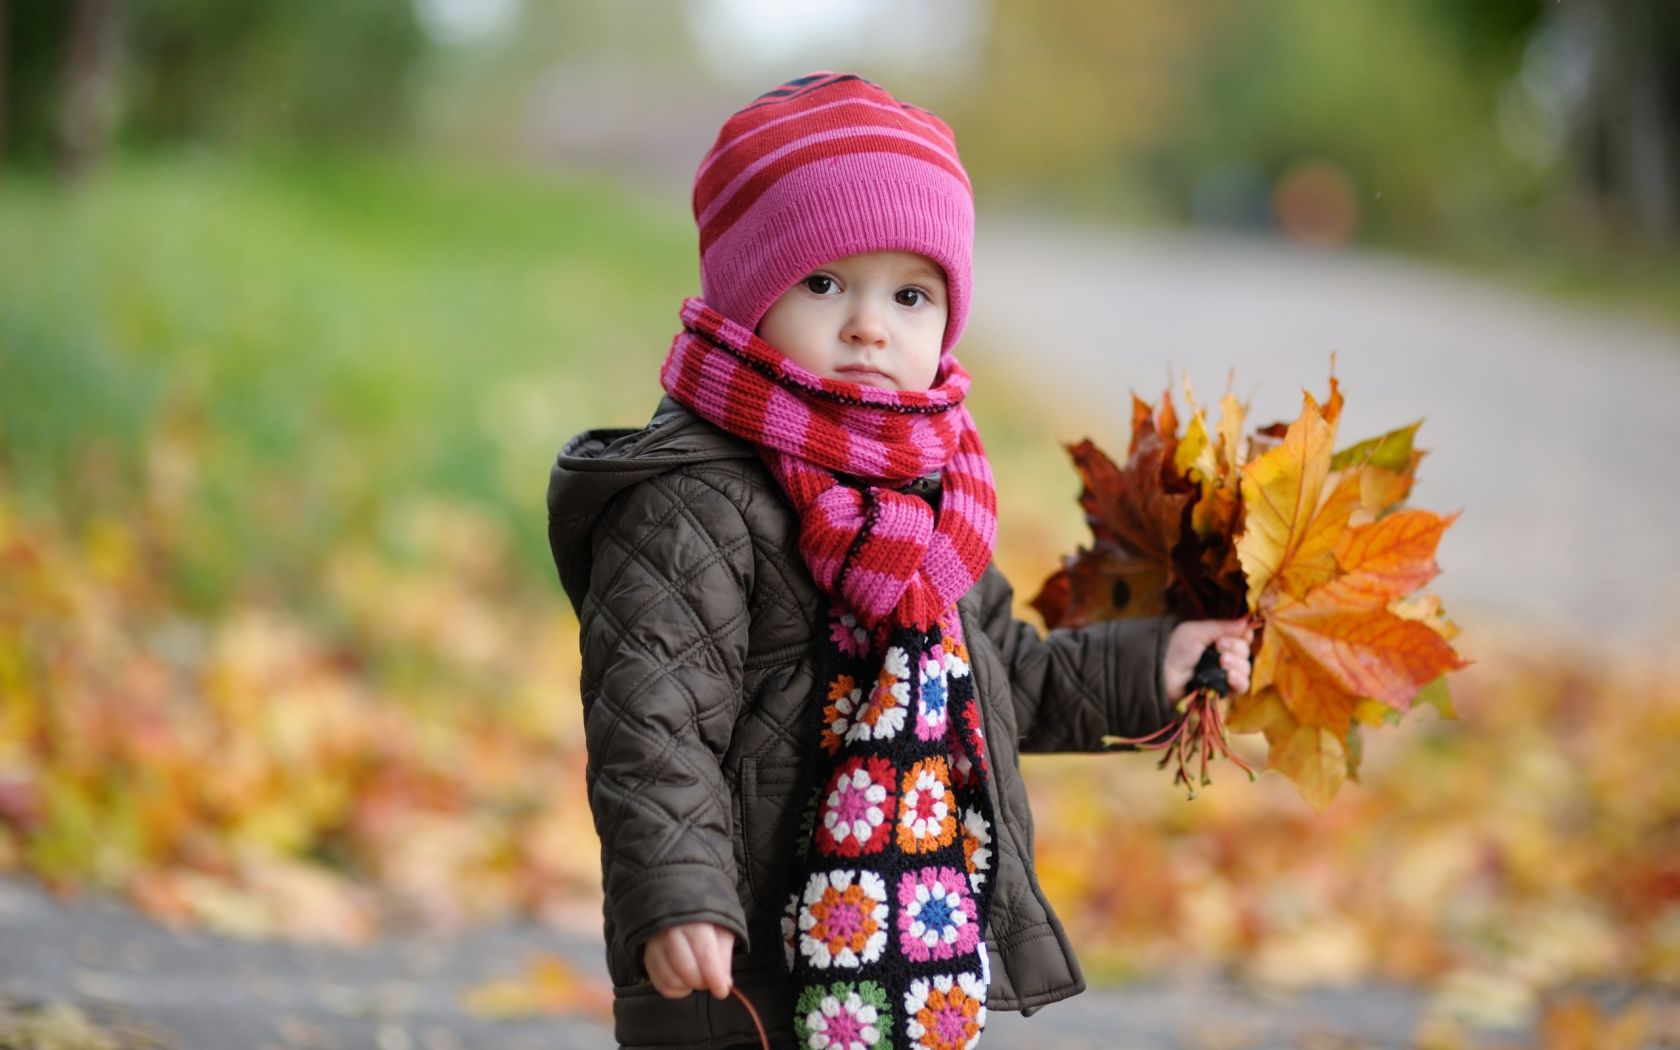 Cute Baby in Autumn Wallpaper in jpg format for free download